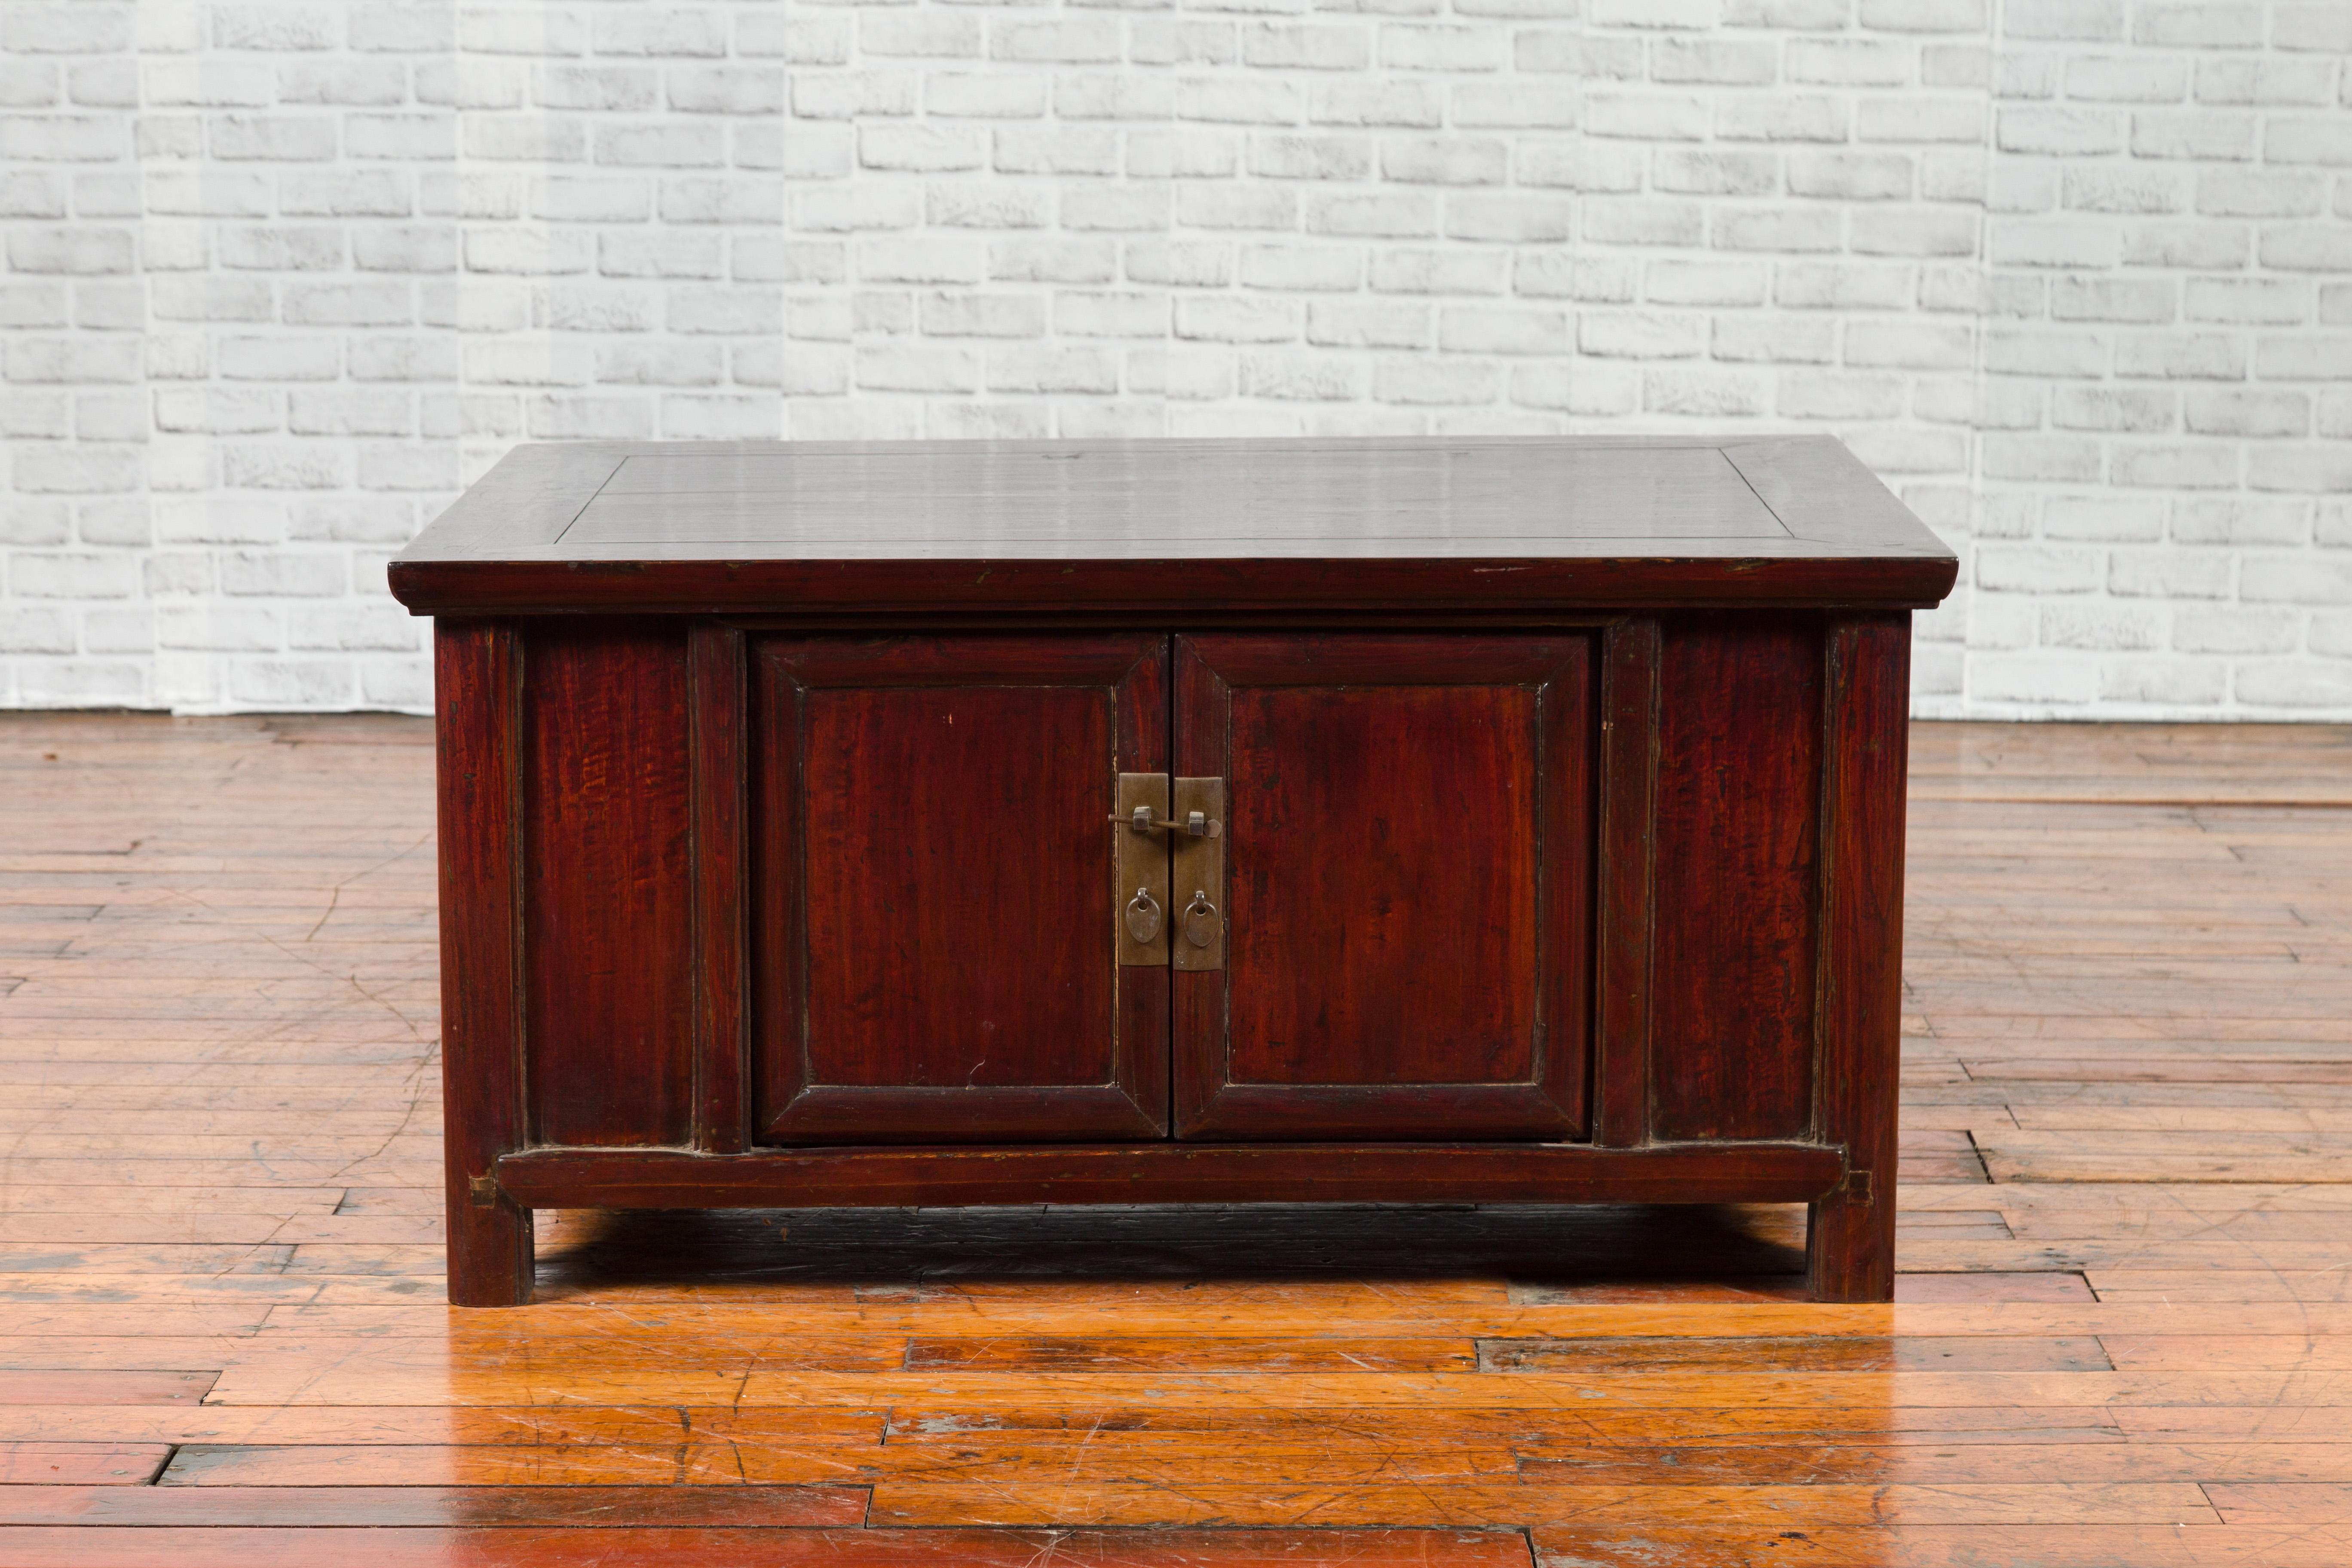 A Chinese Qing dynasty low cabinet from the 19th century, with two doors and reddish brown lacquer. Created in China during the 19th century, this Qing low cabinet could be very well used as a coffee table. Featuring a rectangular top with central